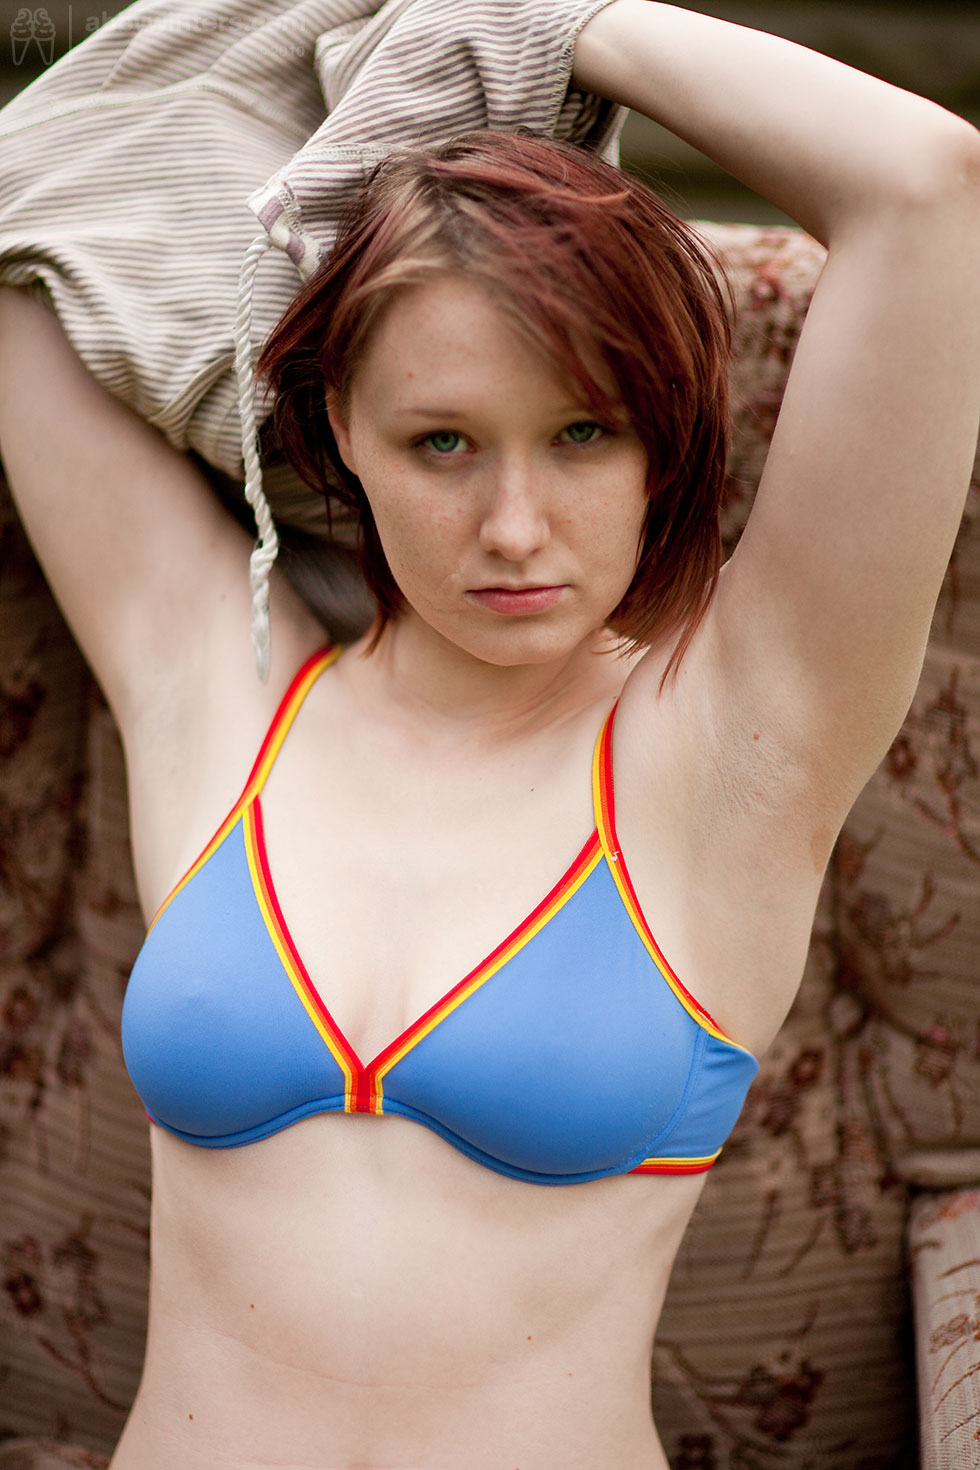 Hairy Redhead Teen Solo - Teen Pale Hairy Redhead Babe Pasty White from Abby Winters - Image Gallery  #77399